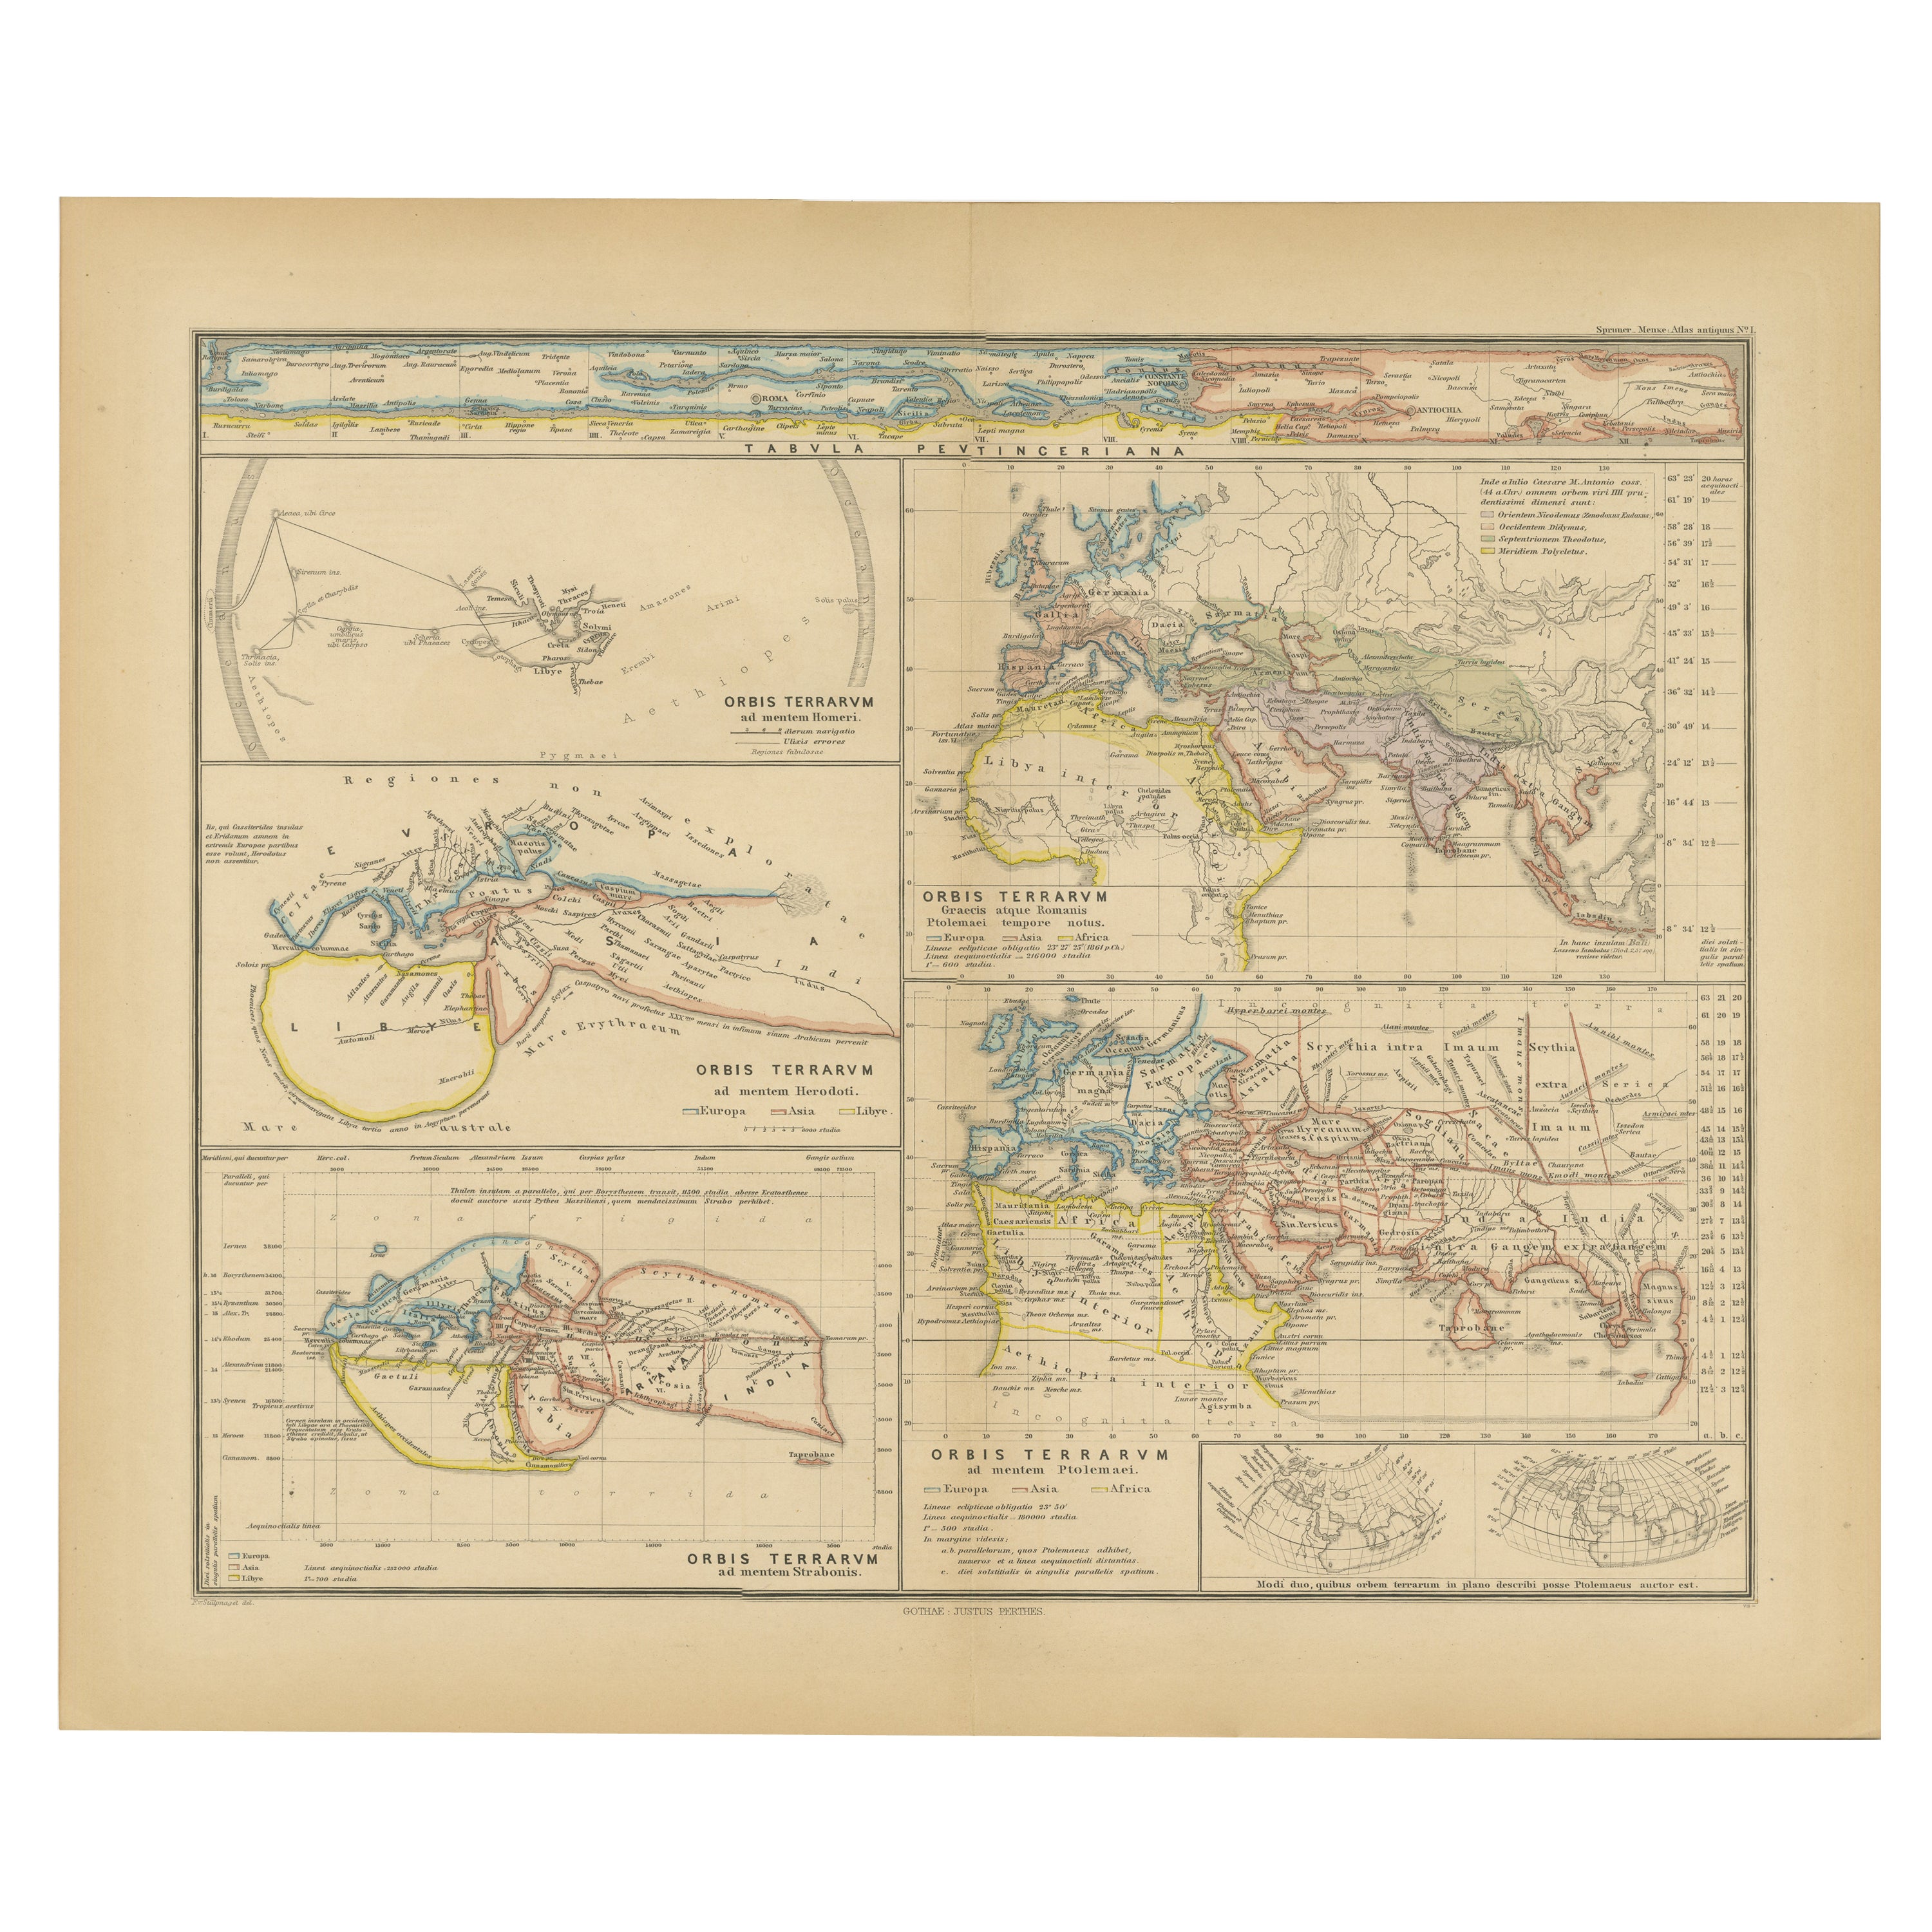 Original Old Composite of Several Maps of the Ancient World on One Sheet, 1880